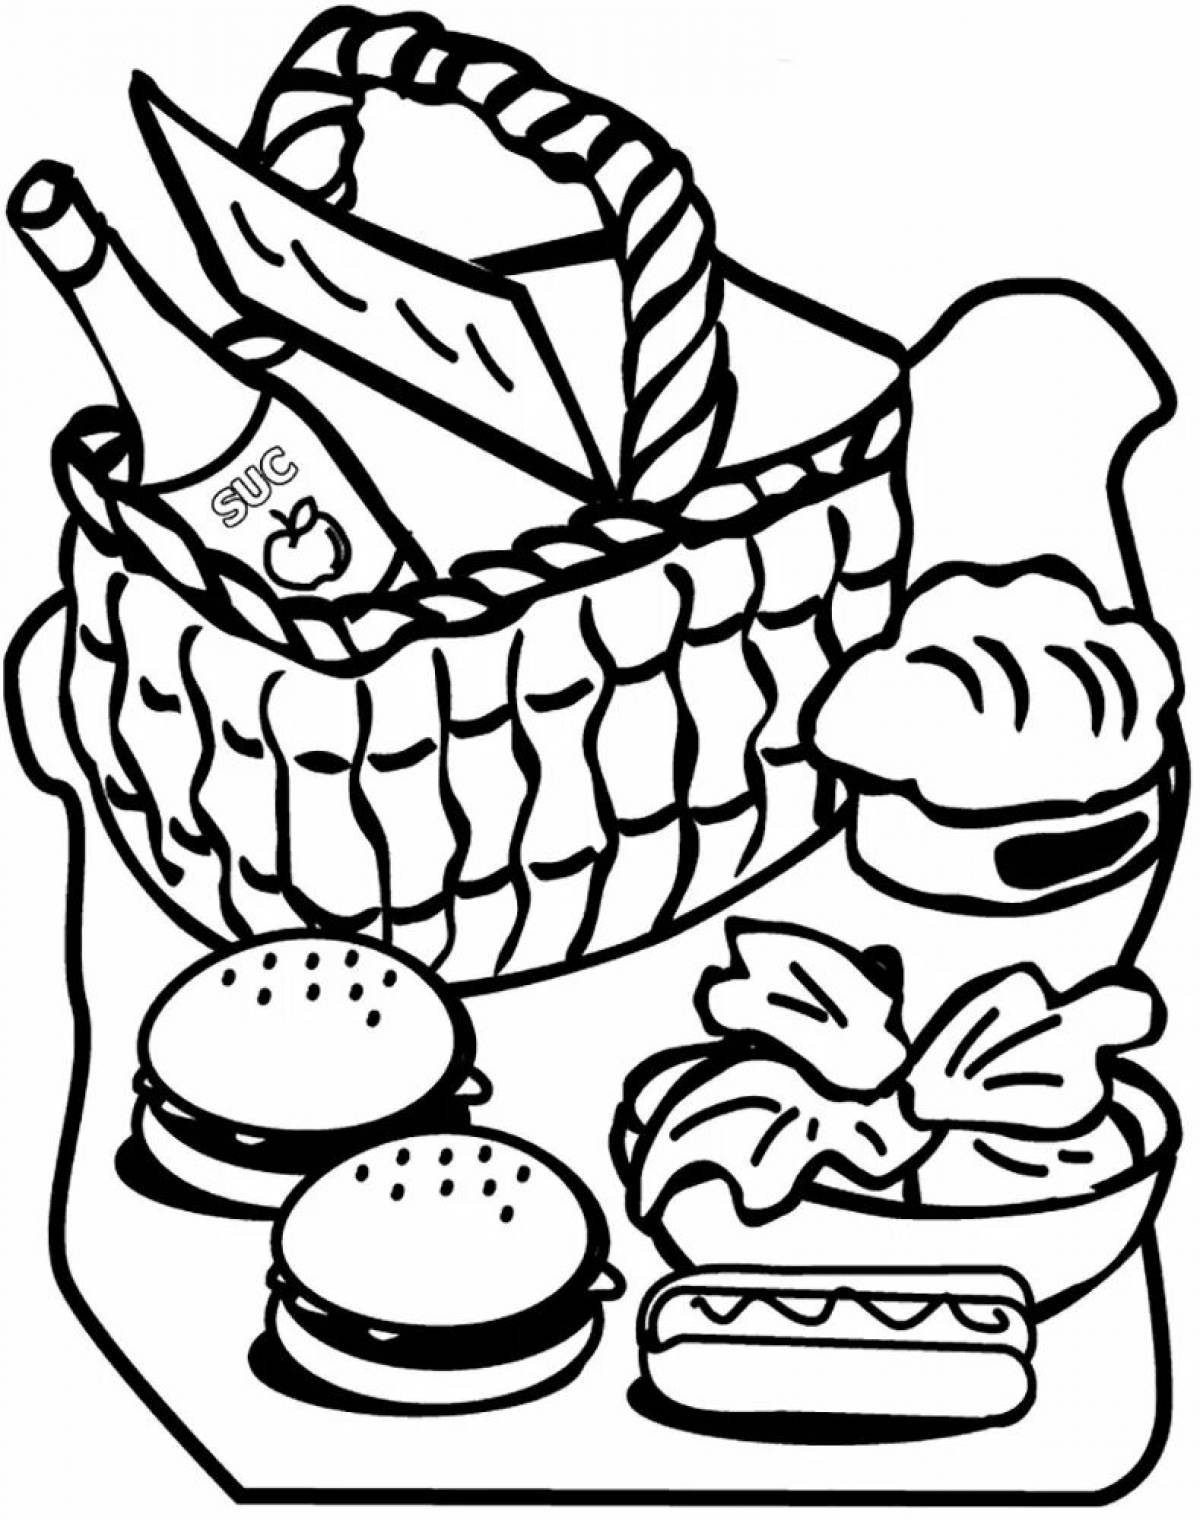 Picnic basket with food #15